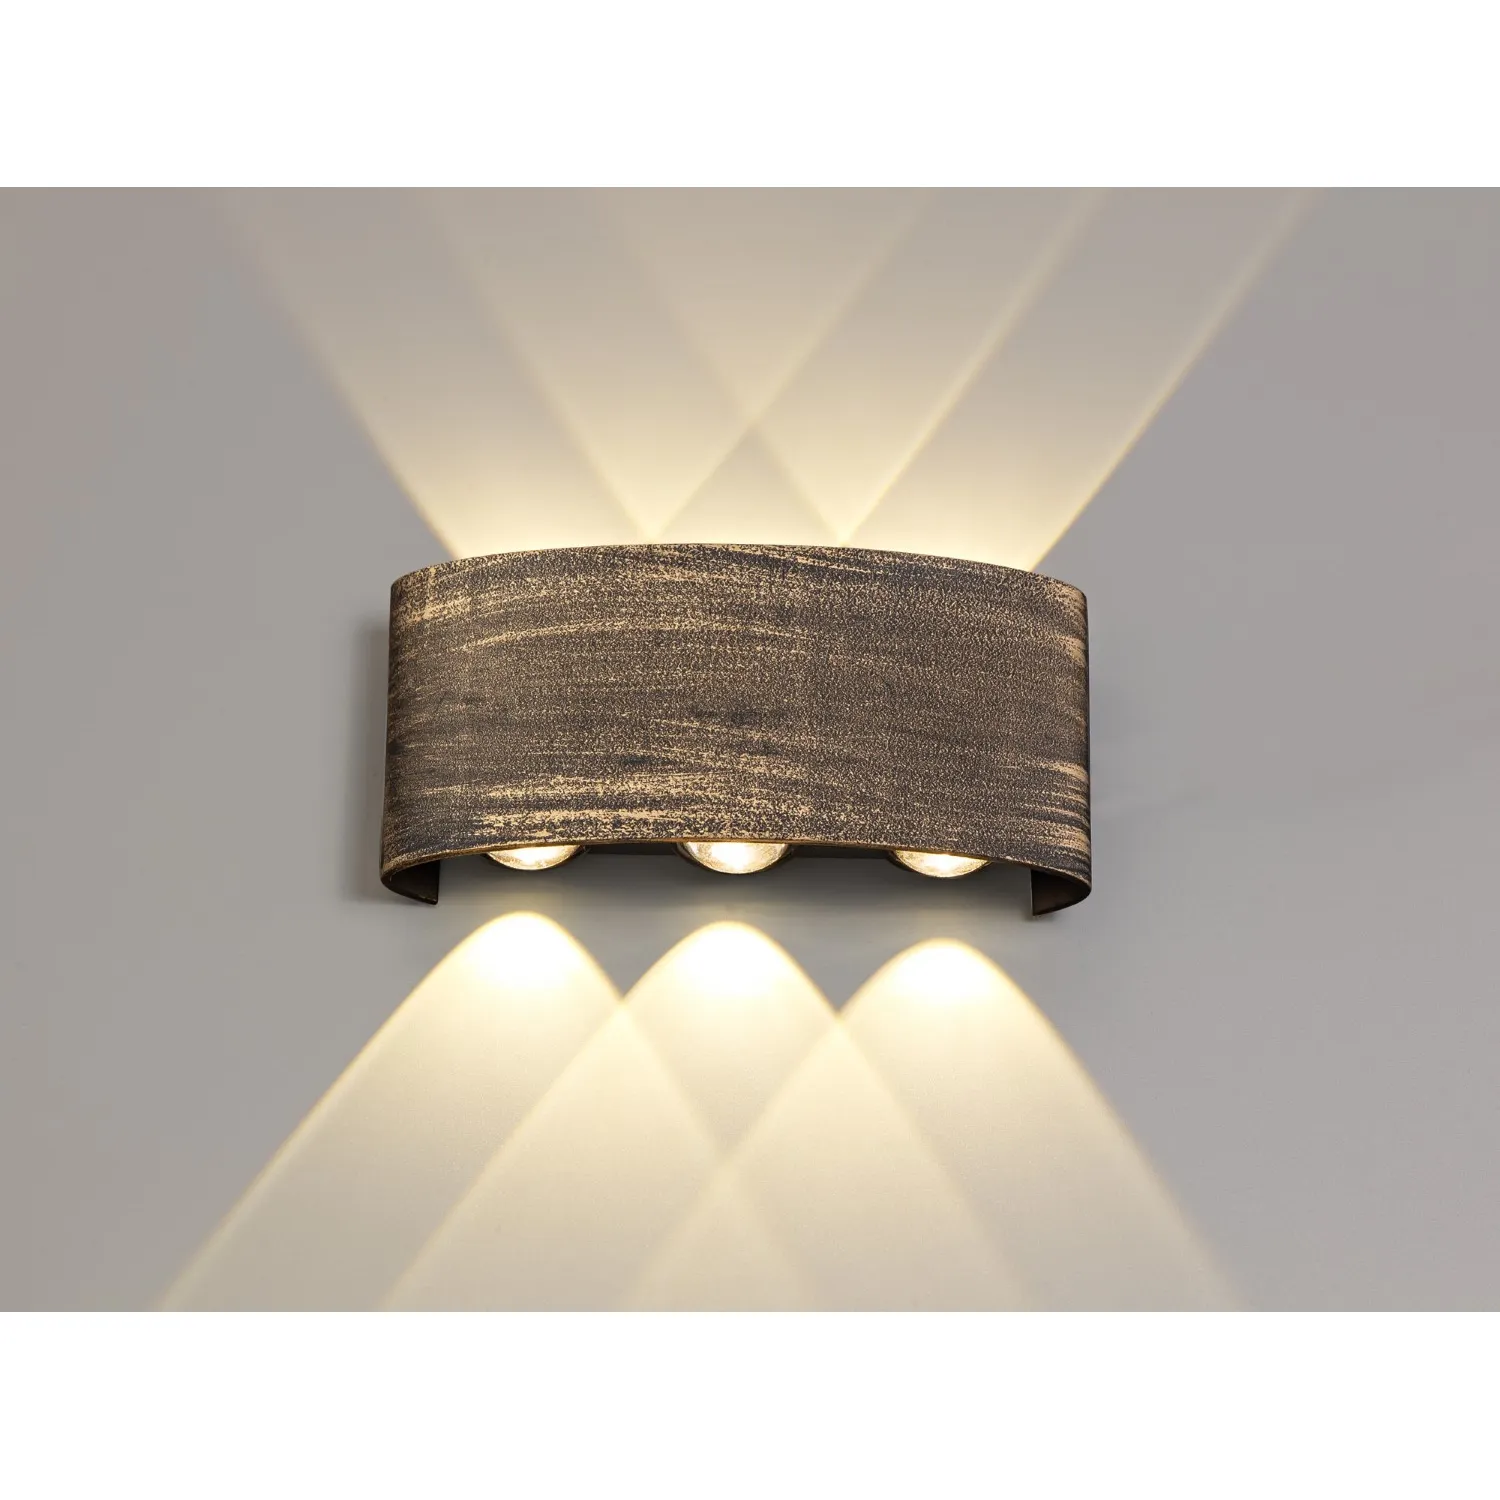 Rochester Up And Downward Lighting Wall Lamp, 6 x 1W LED, 3000K, 500lm, IP54, Gold Black, 3yrs Warranty